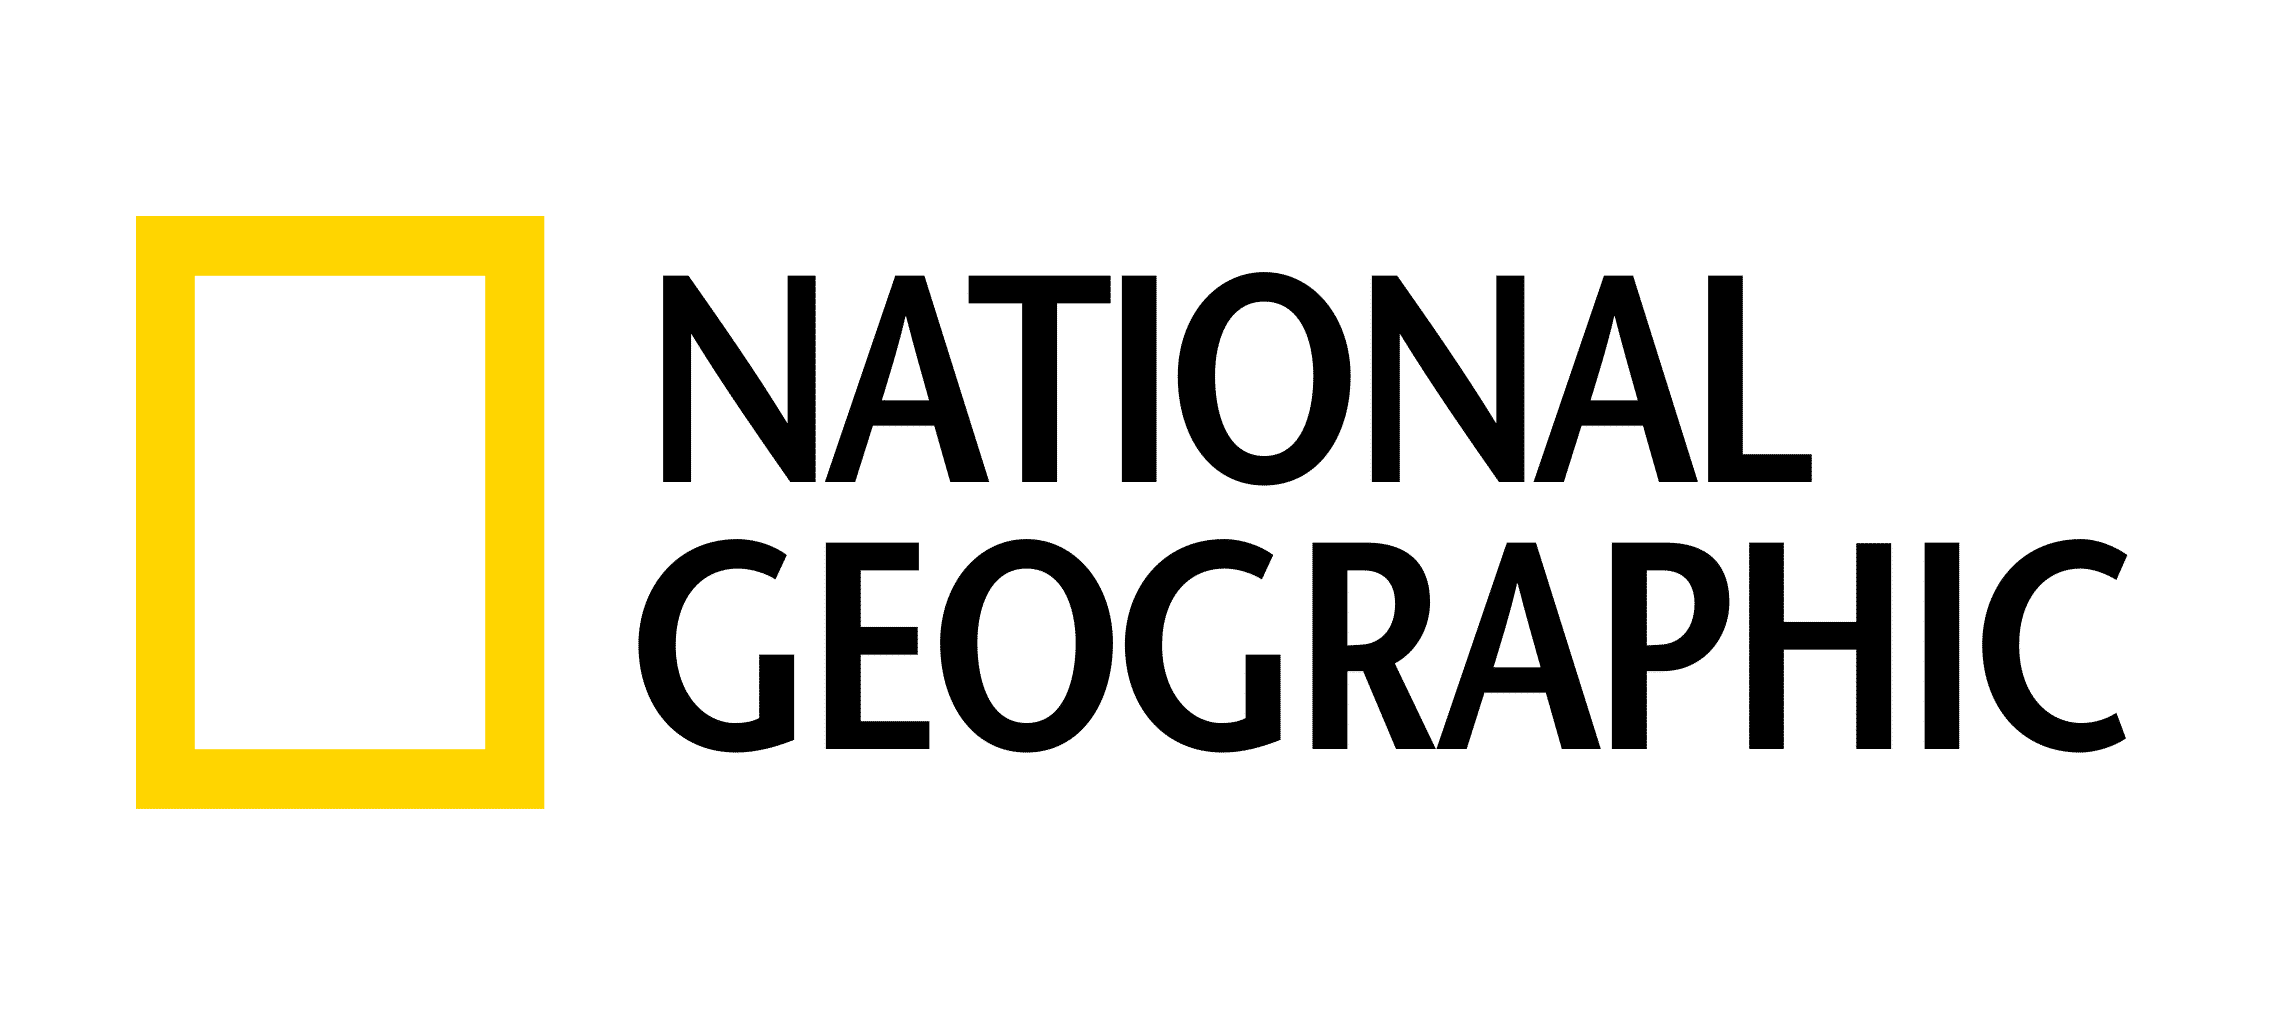 National Geographic Internships 2020 - Apply Now